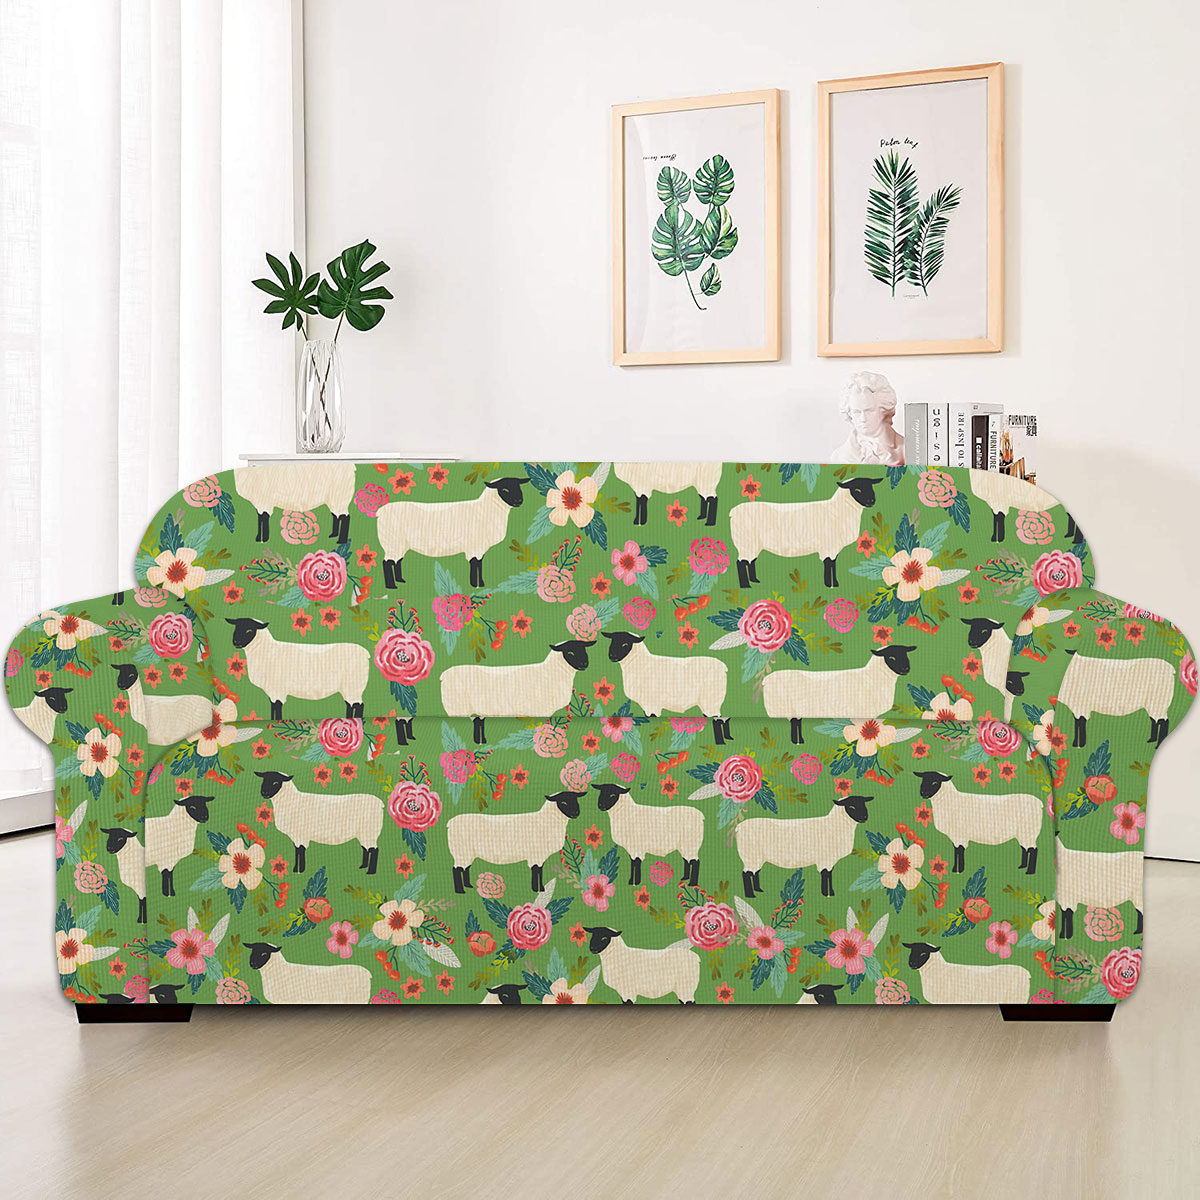 Sheep Floral Green Pattern Sofa Cover